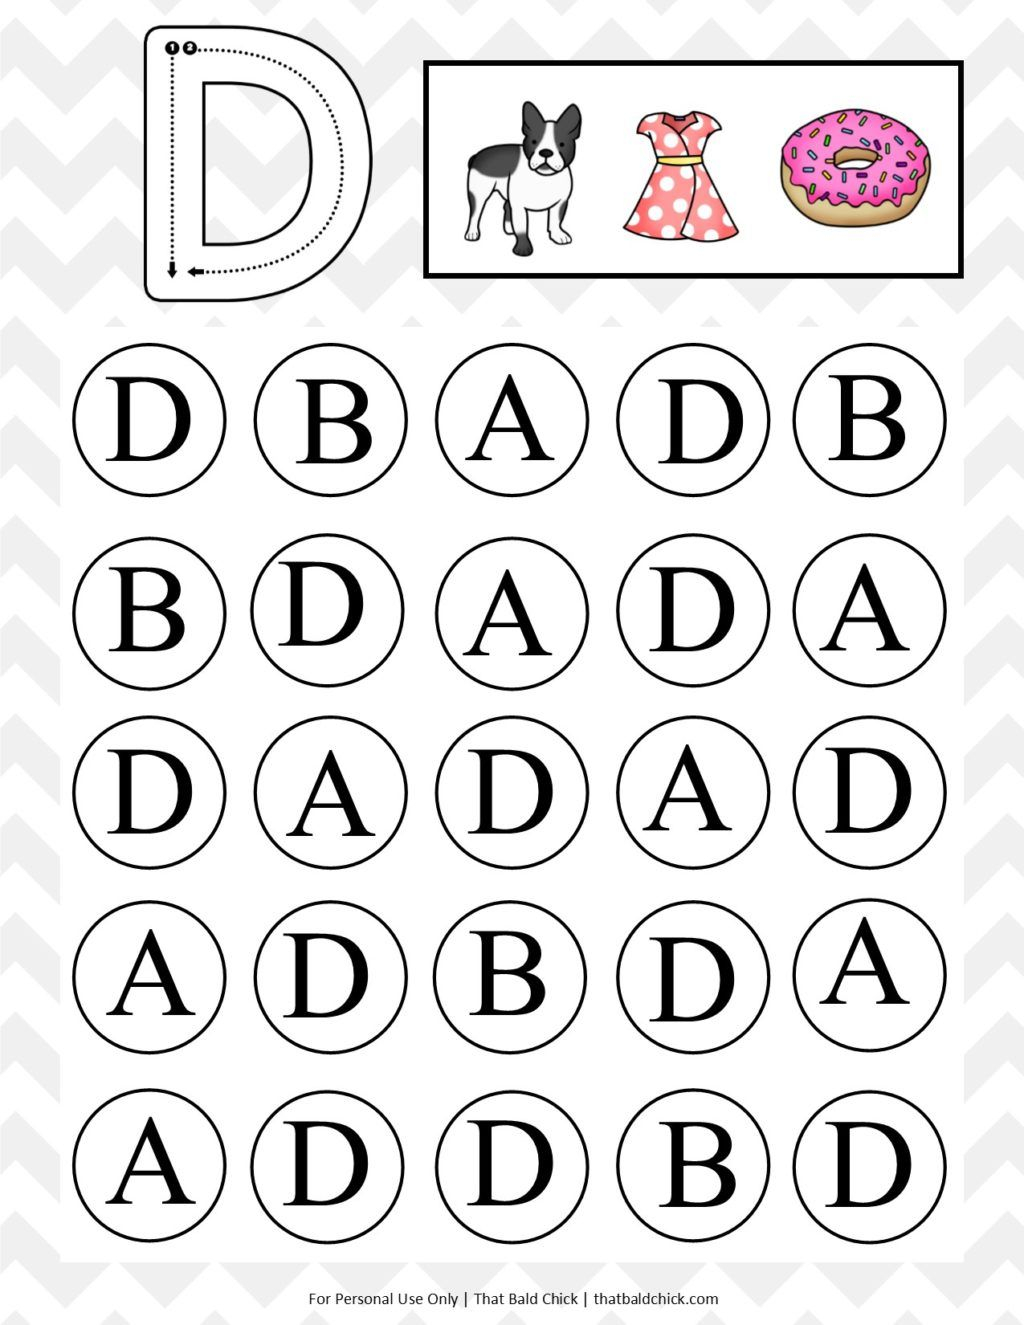 Practice Letter Recognition With This Free Printable with Alphabet Recognition Worksheets For Preschool